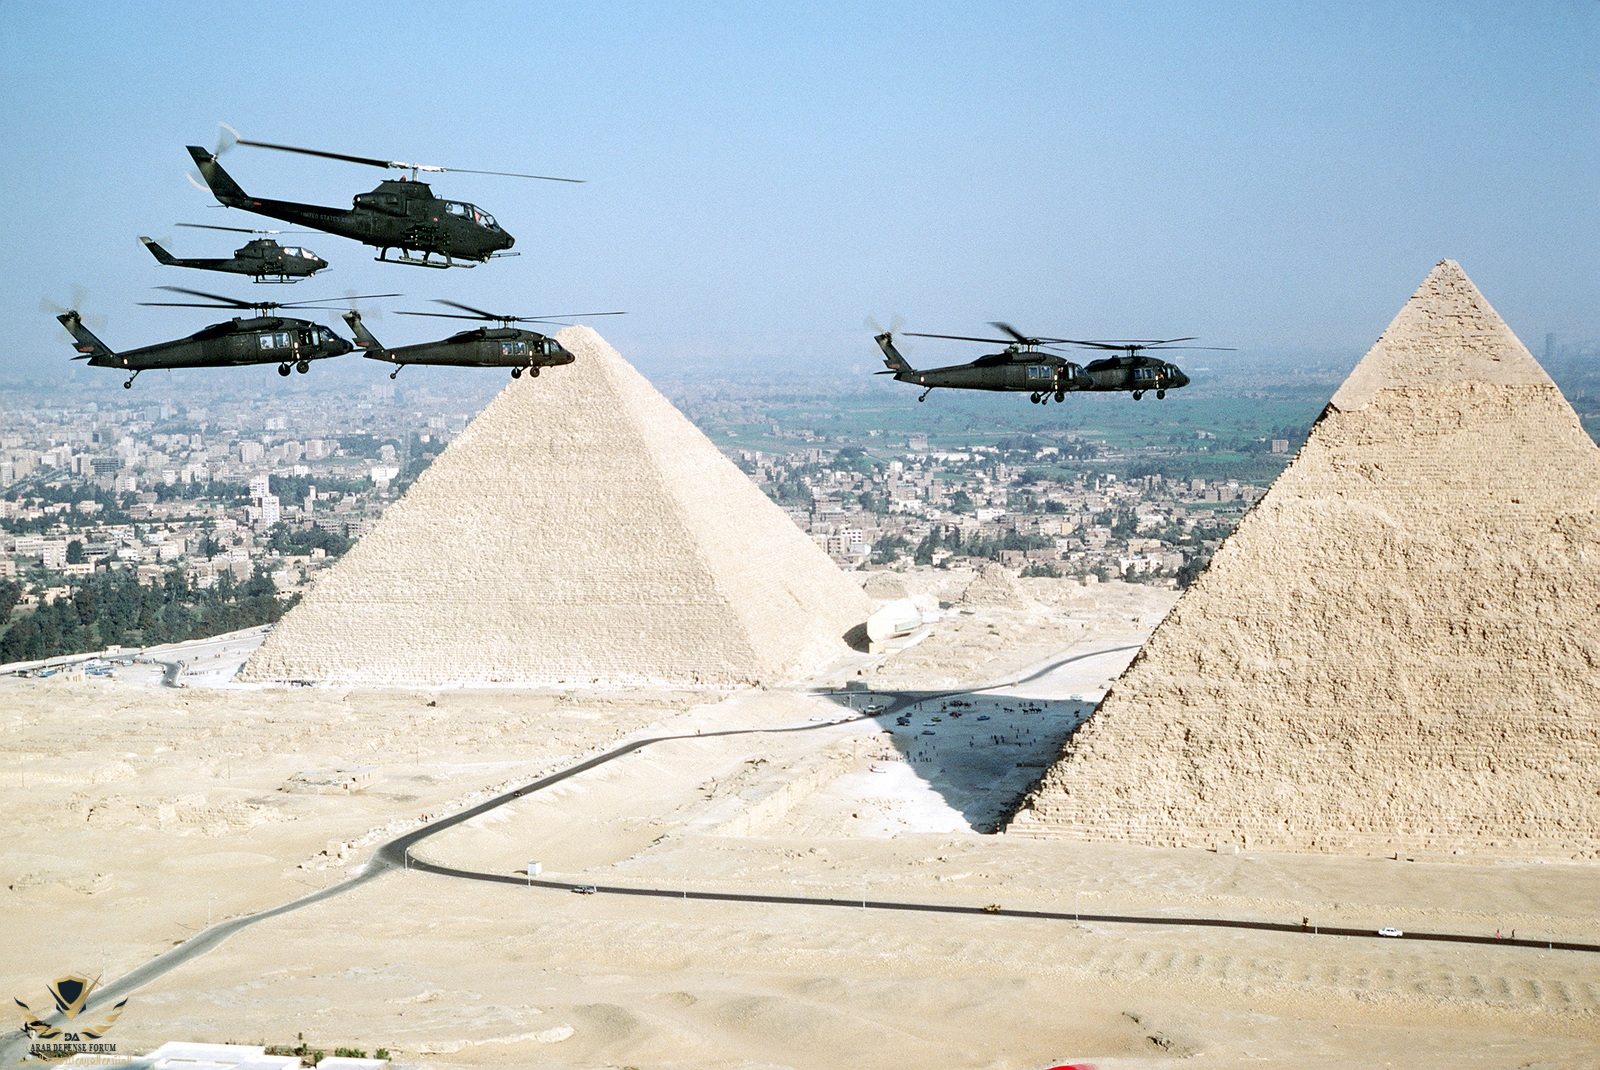 an-air-to-air-right-side-view-of-uh-60-blackhawk-and-ah-1g-cobra-helicopters-f2cde6-1600.jpg